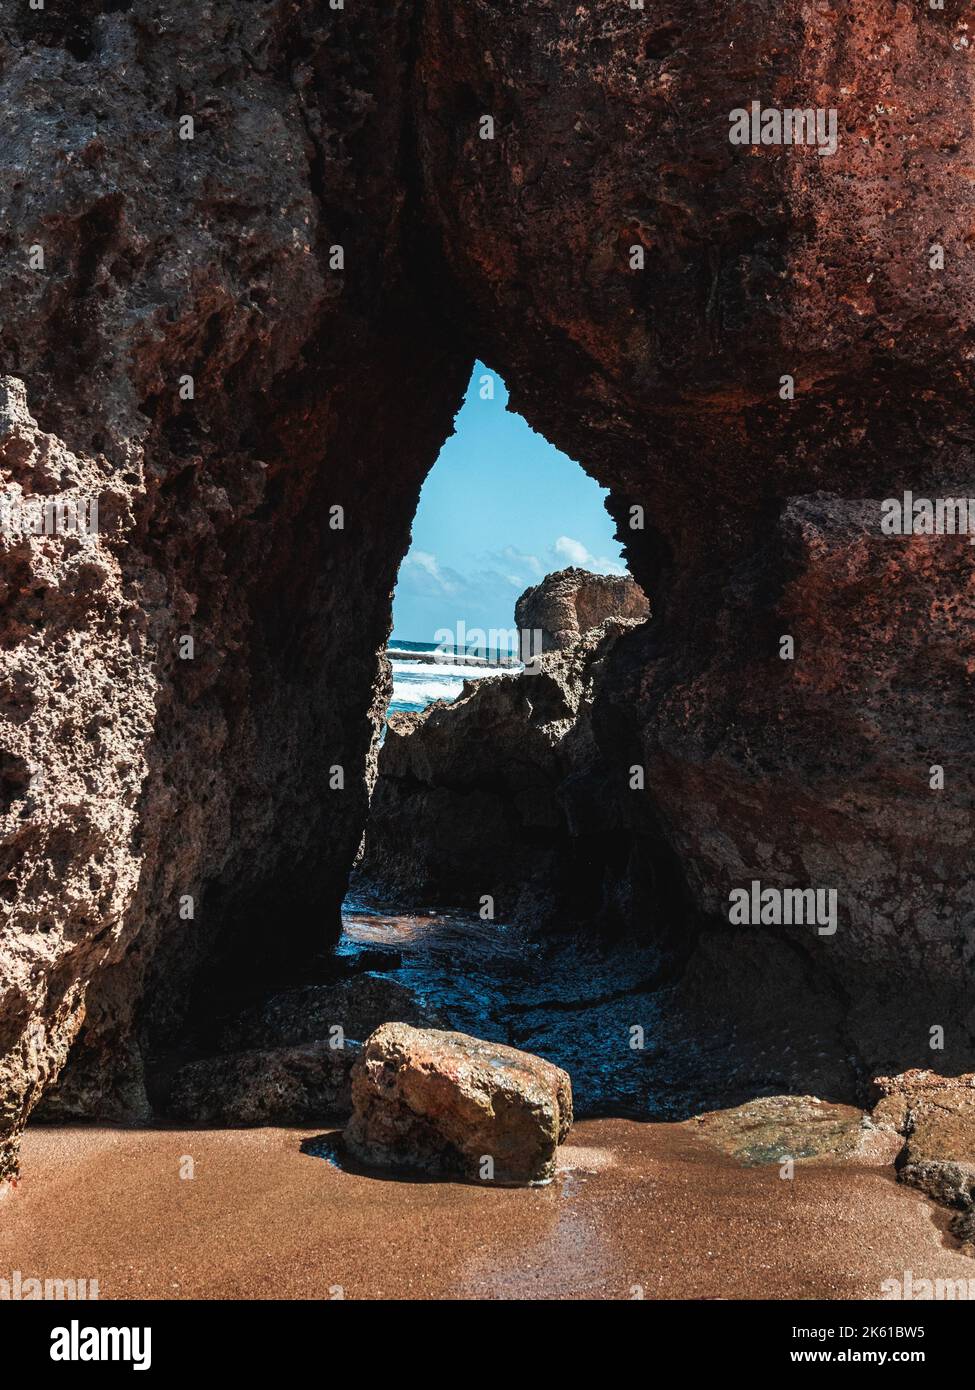 Puerto rico Aguadilla survival beach caves with big rocks formation from the caribbean coast puerto rico northwest side. Island coast nature structure Stock Photo